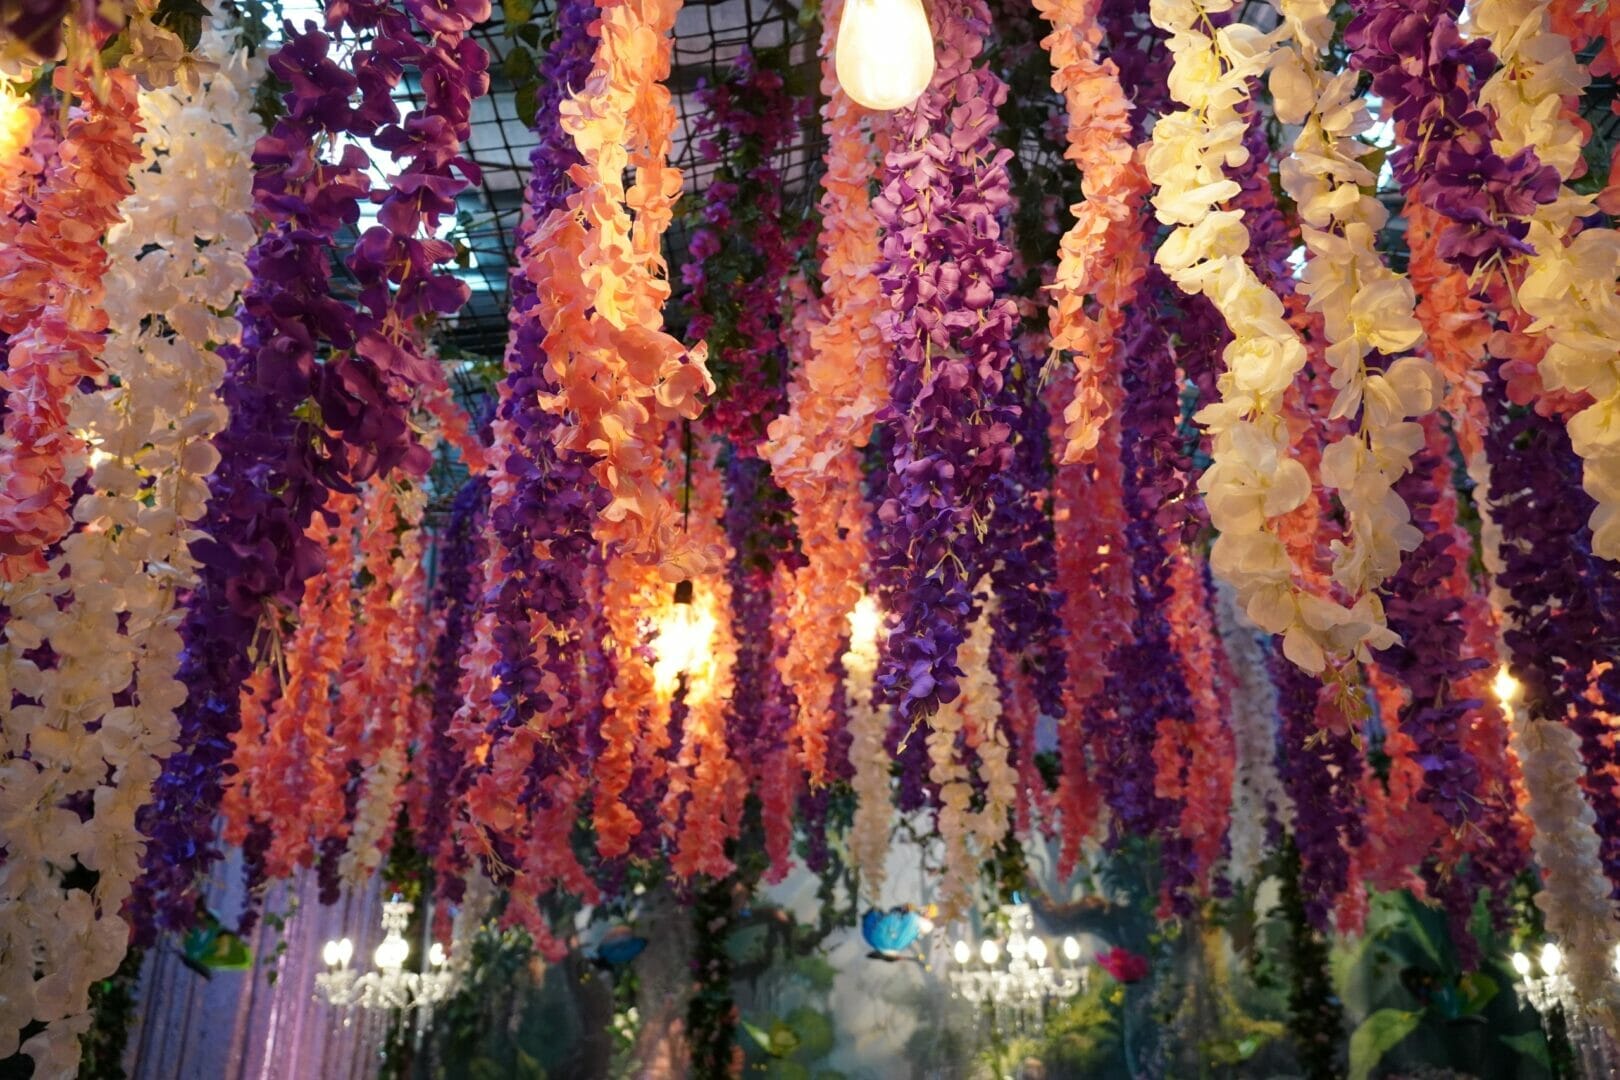 hanging artificial flowers in an enchanted garden themed event